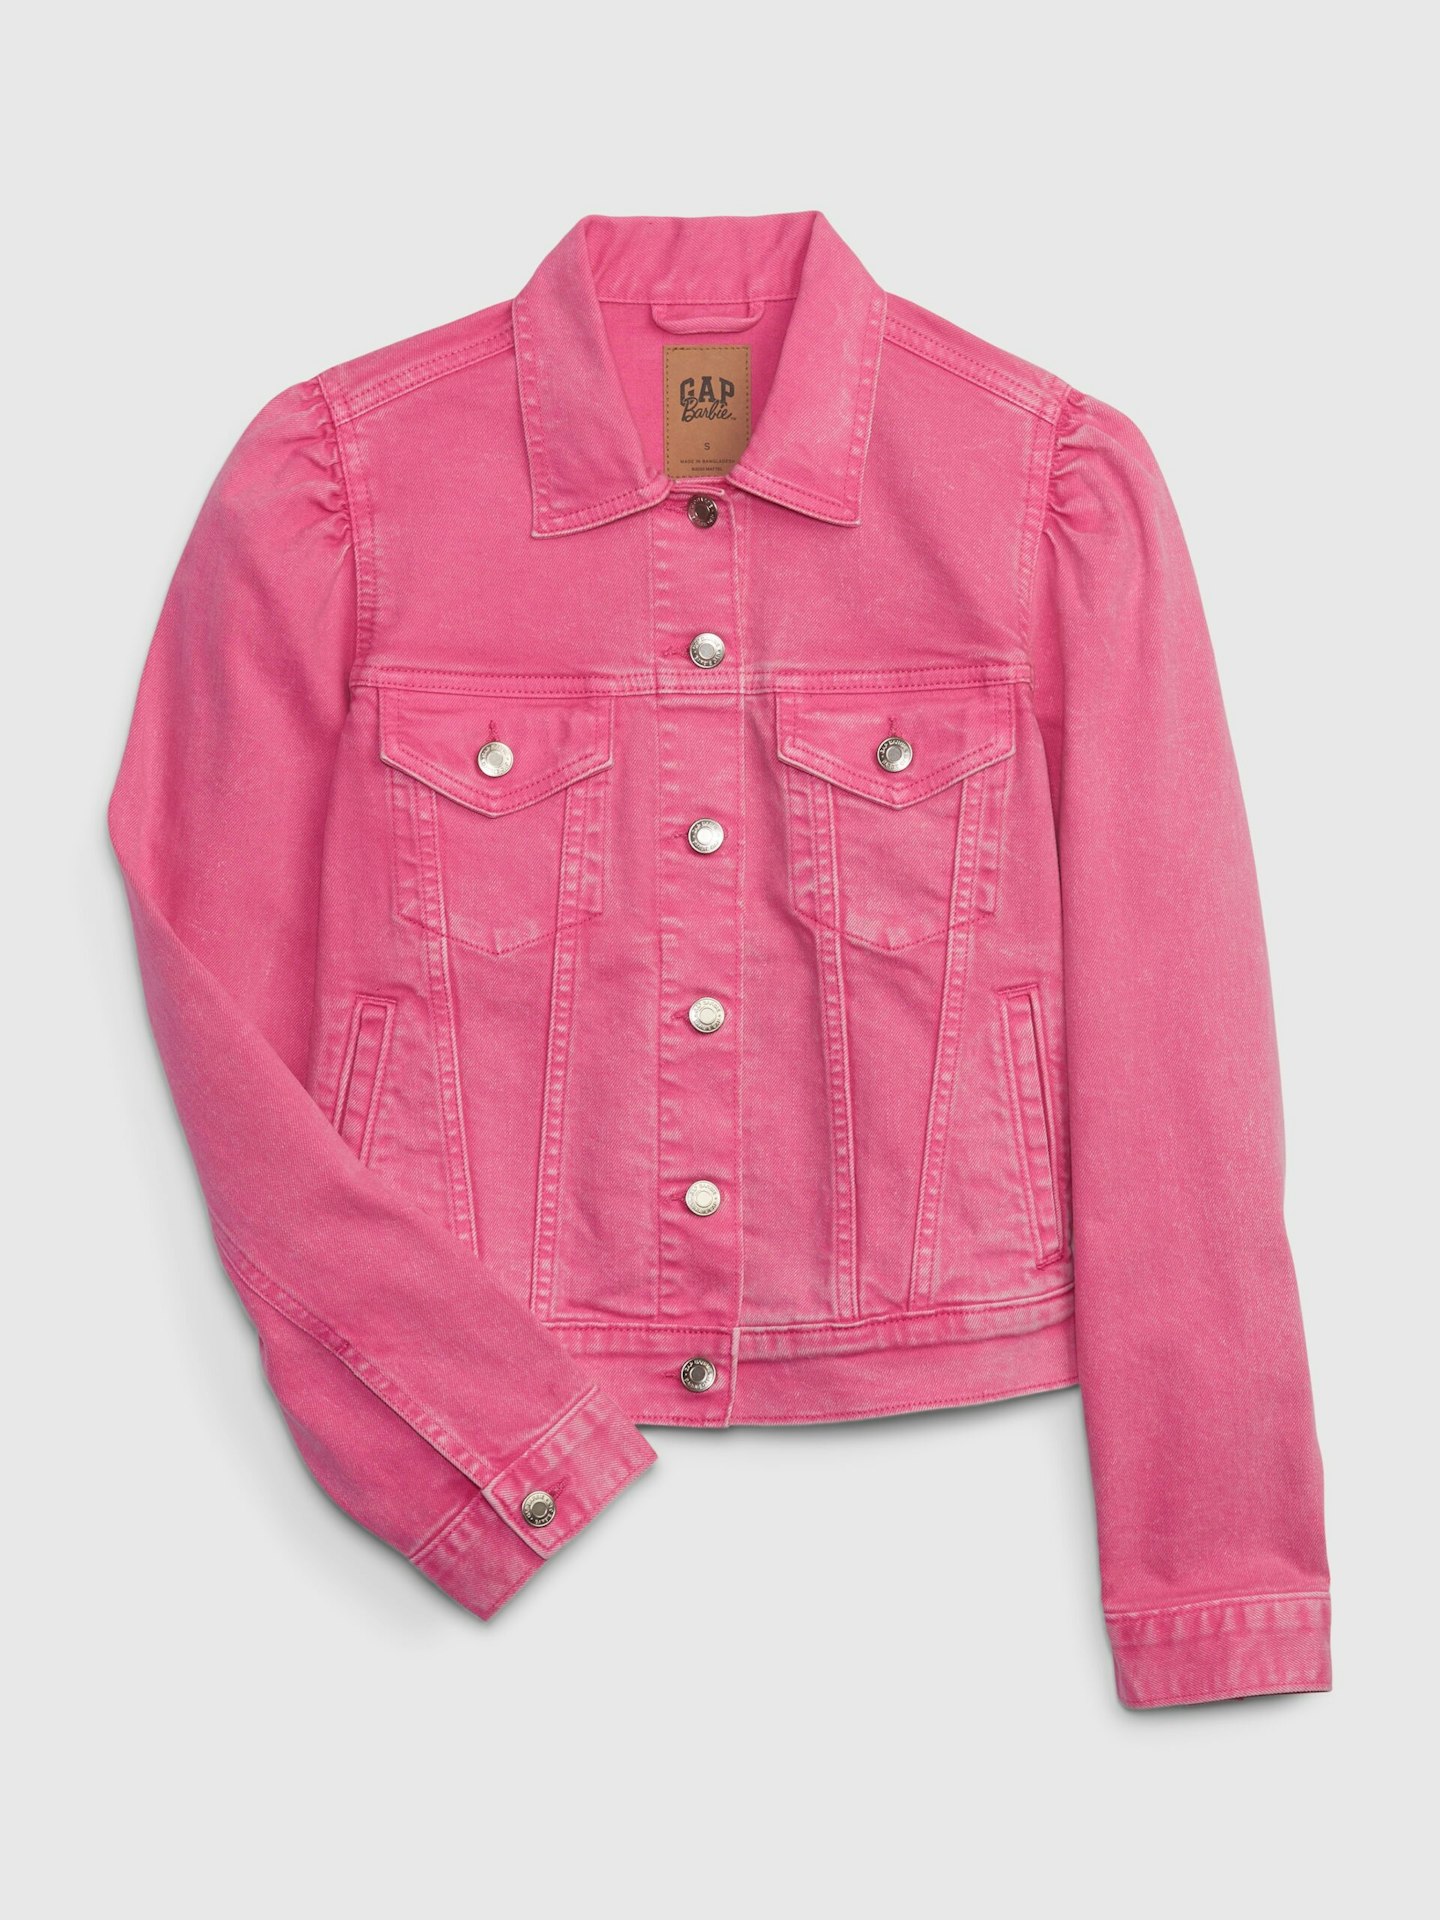 The Gap x Barbie Collection Is Here